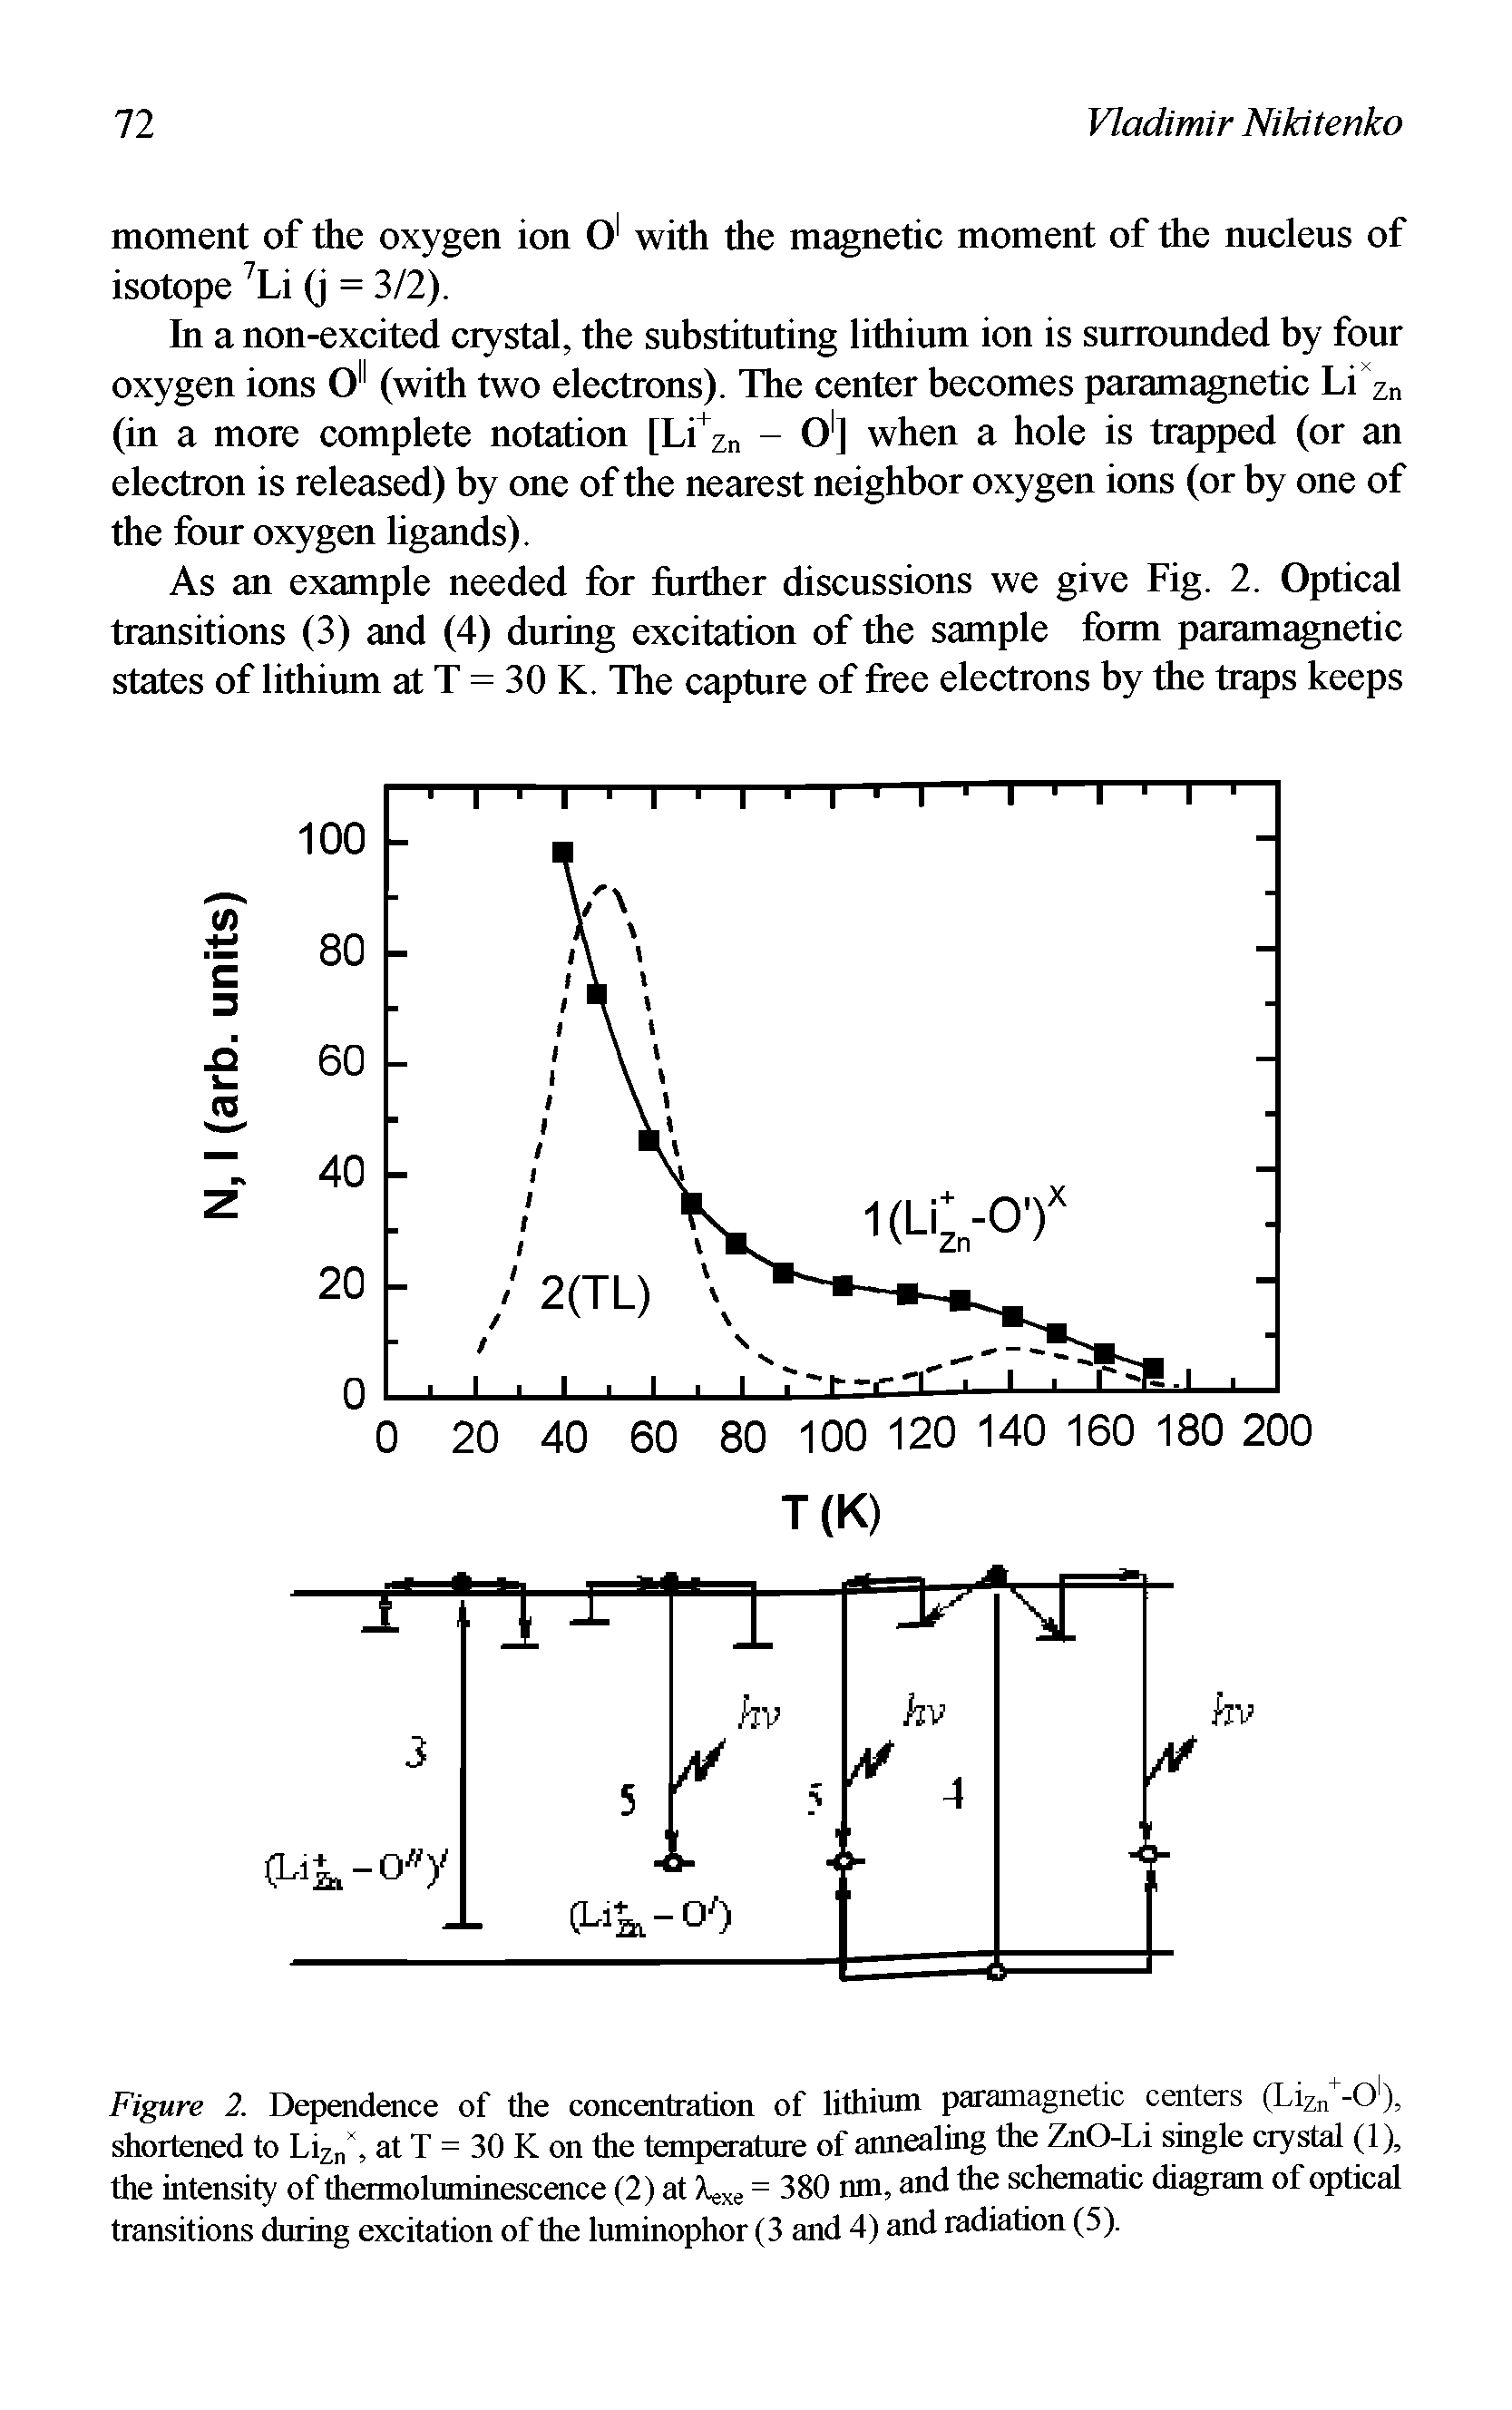 Figure 2. Dependence of the concentration of lithium paramagnetic centers (Lizn -O), shortened to Liz , at T = 30 K on the temperature of aimealing the ZnO-Li single crystal (1), the intensity of thermoluminescence (2) at A xe = 380 nm, and the schematic diagram of optical transitions during excitation of the luminophor (3 and 4) and radiation (5).